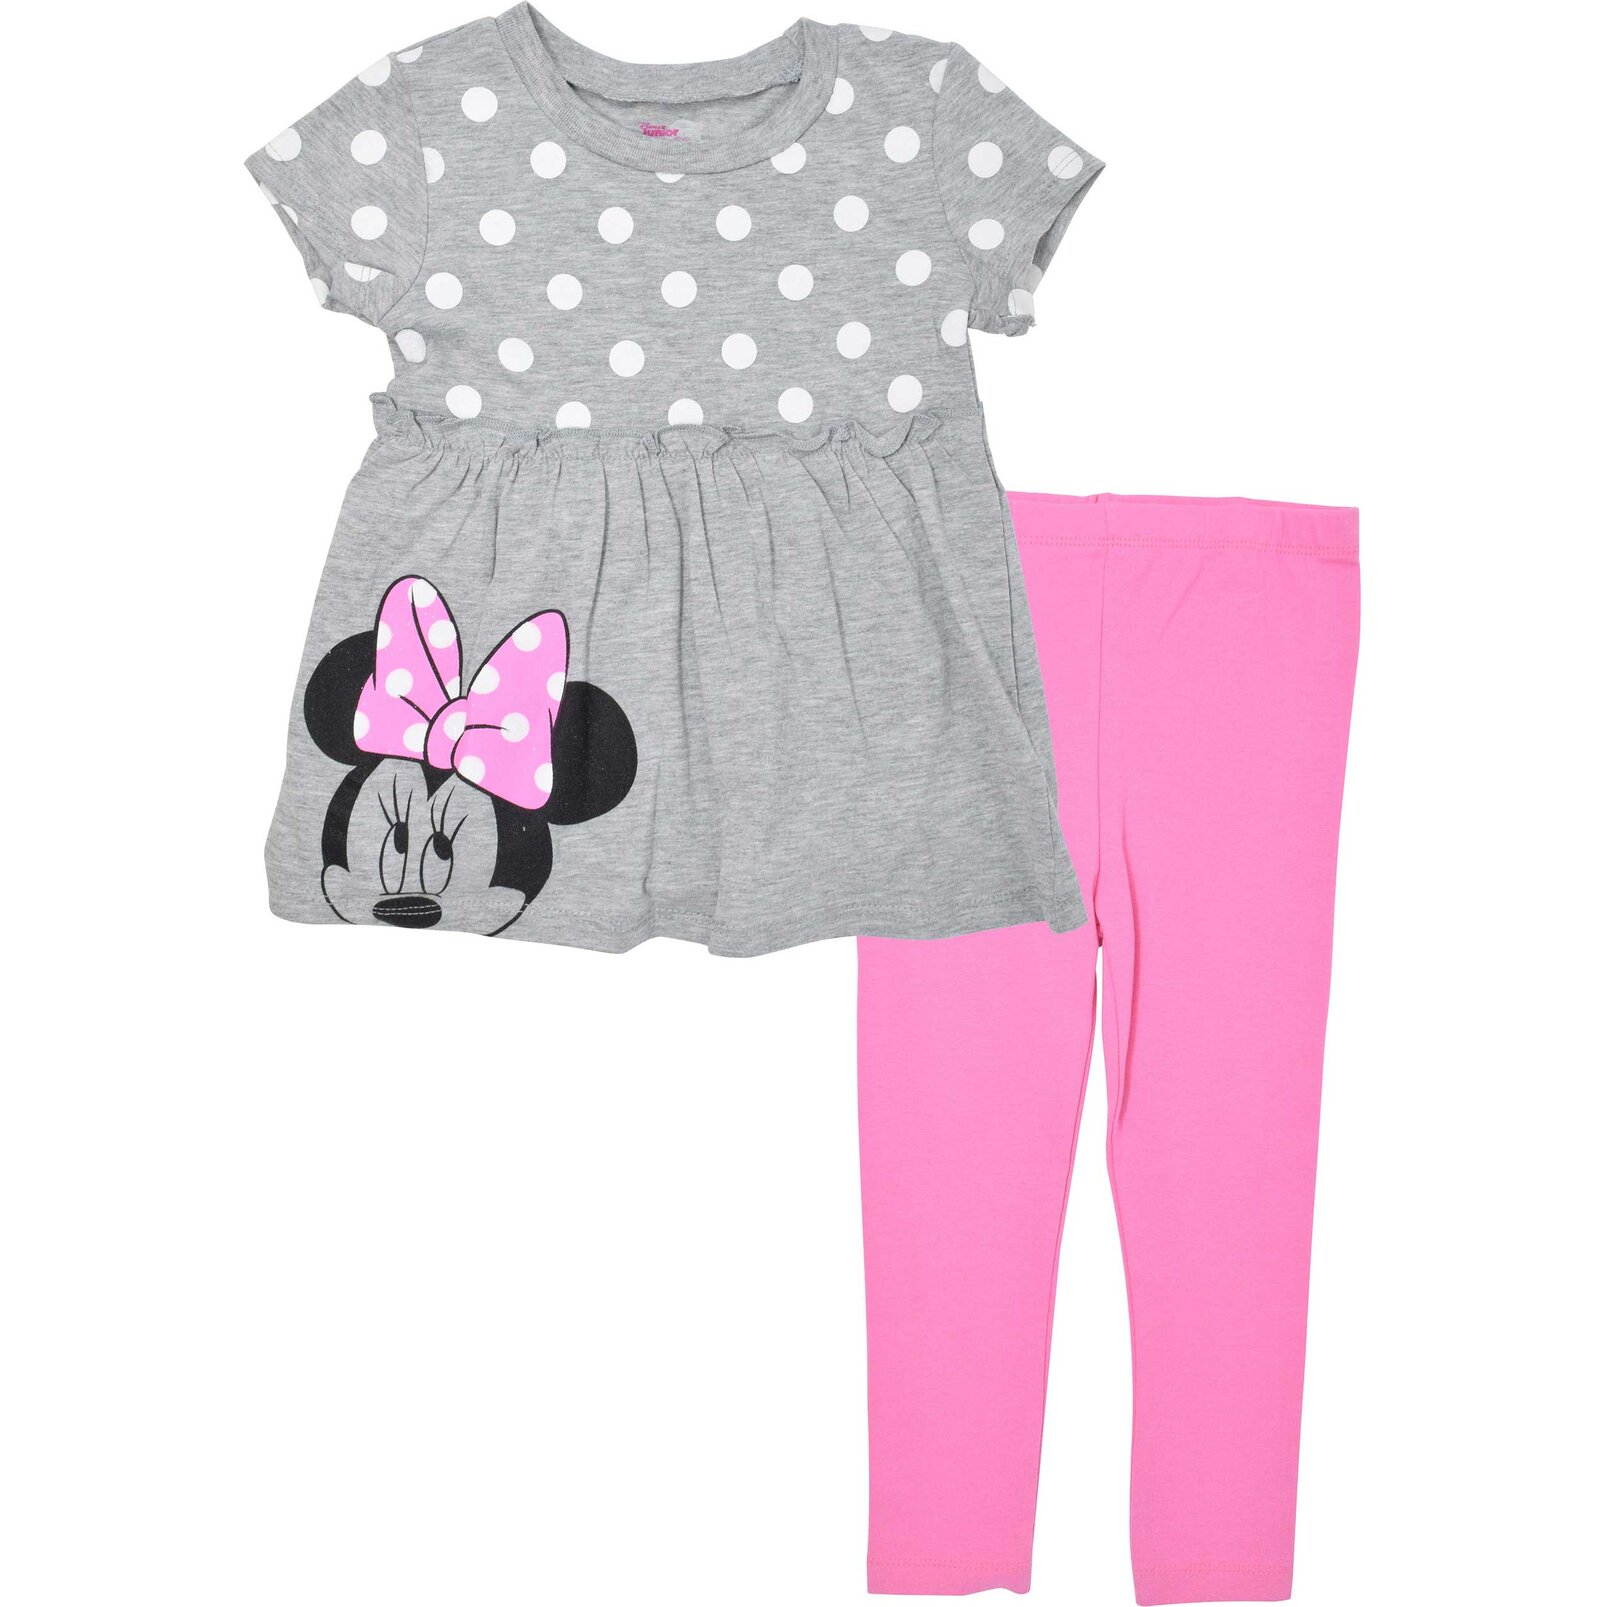 Disney Minnie Mouse Toddler Girls T-Shirt Dress and Leggings Outfit Set Infant to Big Kid - image 1 of 3